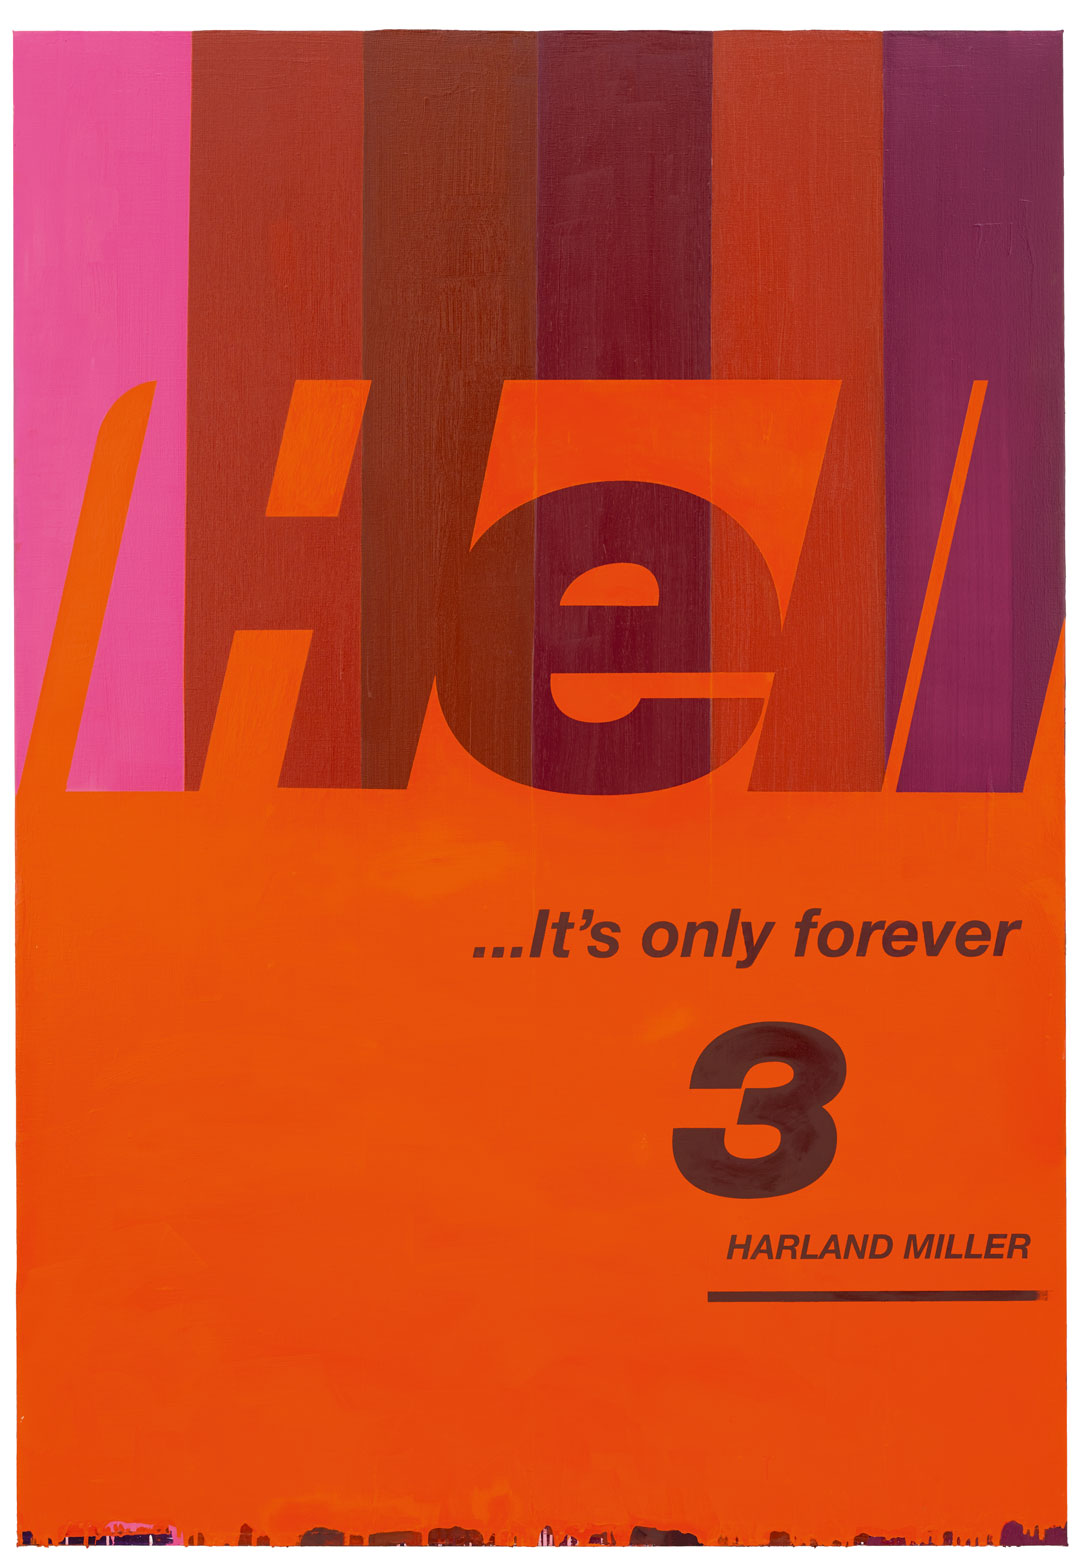 Hell… It’s Only Forever 3 (2016) by Harland Miller. As reproduced in Harland Miller: In Shadows I Boogie